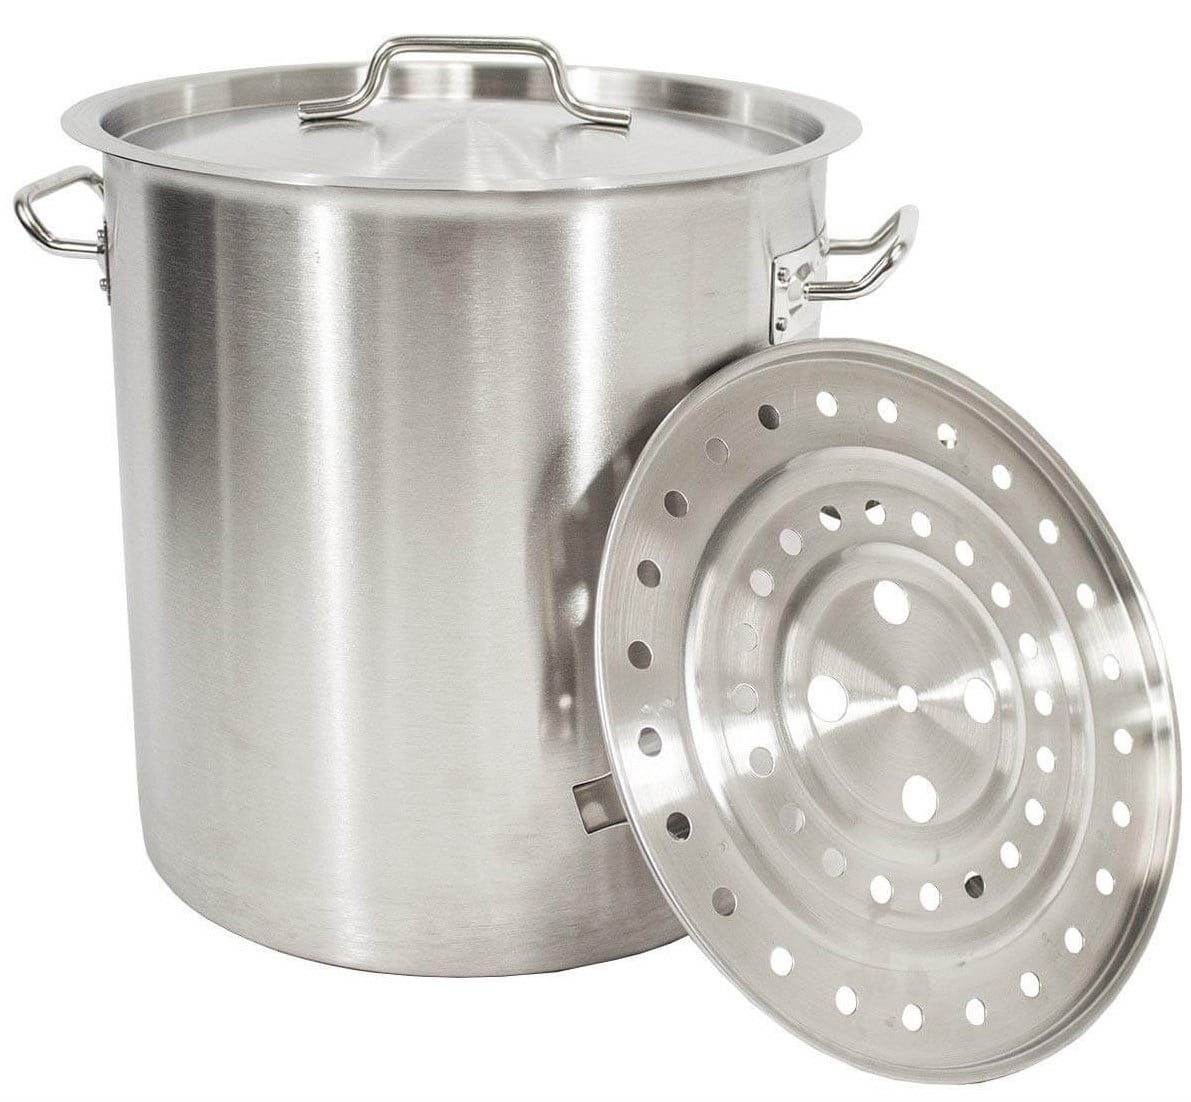 Stainless Steel Stockpot Big Cookware Oil Bucket Heavy Duty Easy to Clean  Canning Pasta Pot Tall Cooking Pot for Hotel Household Commercial 6L